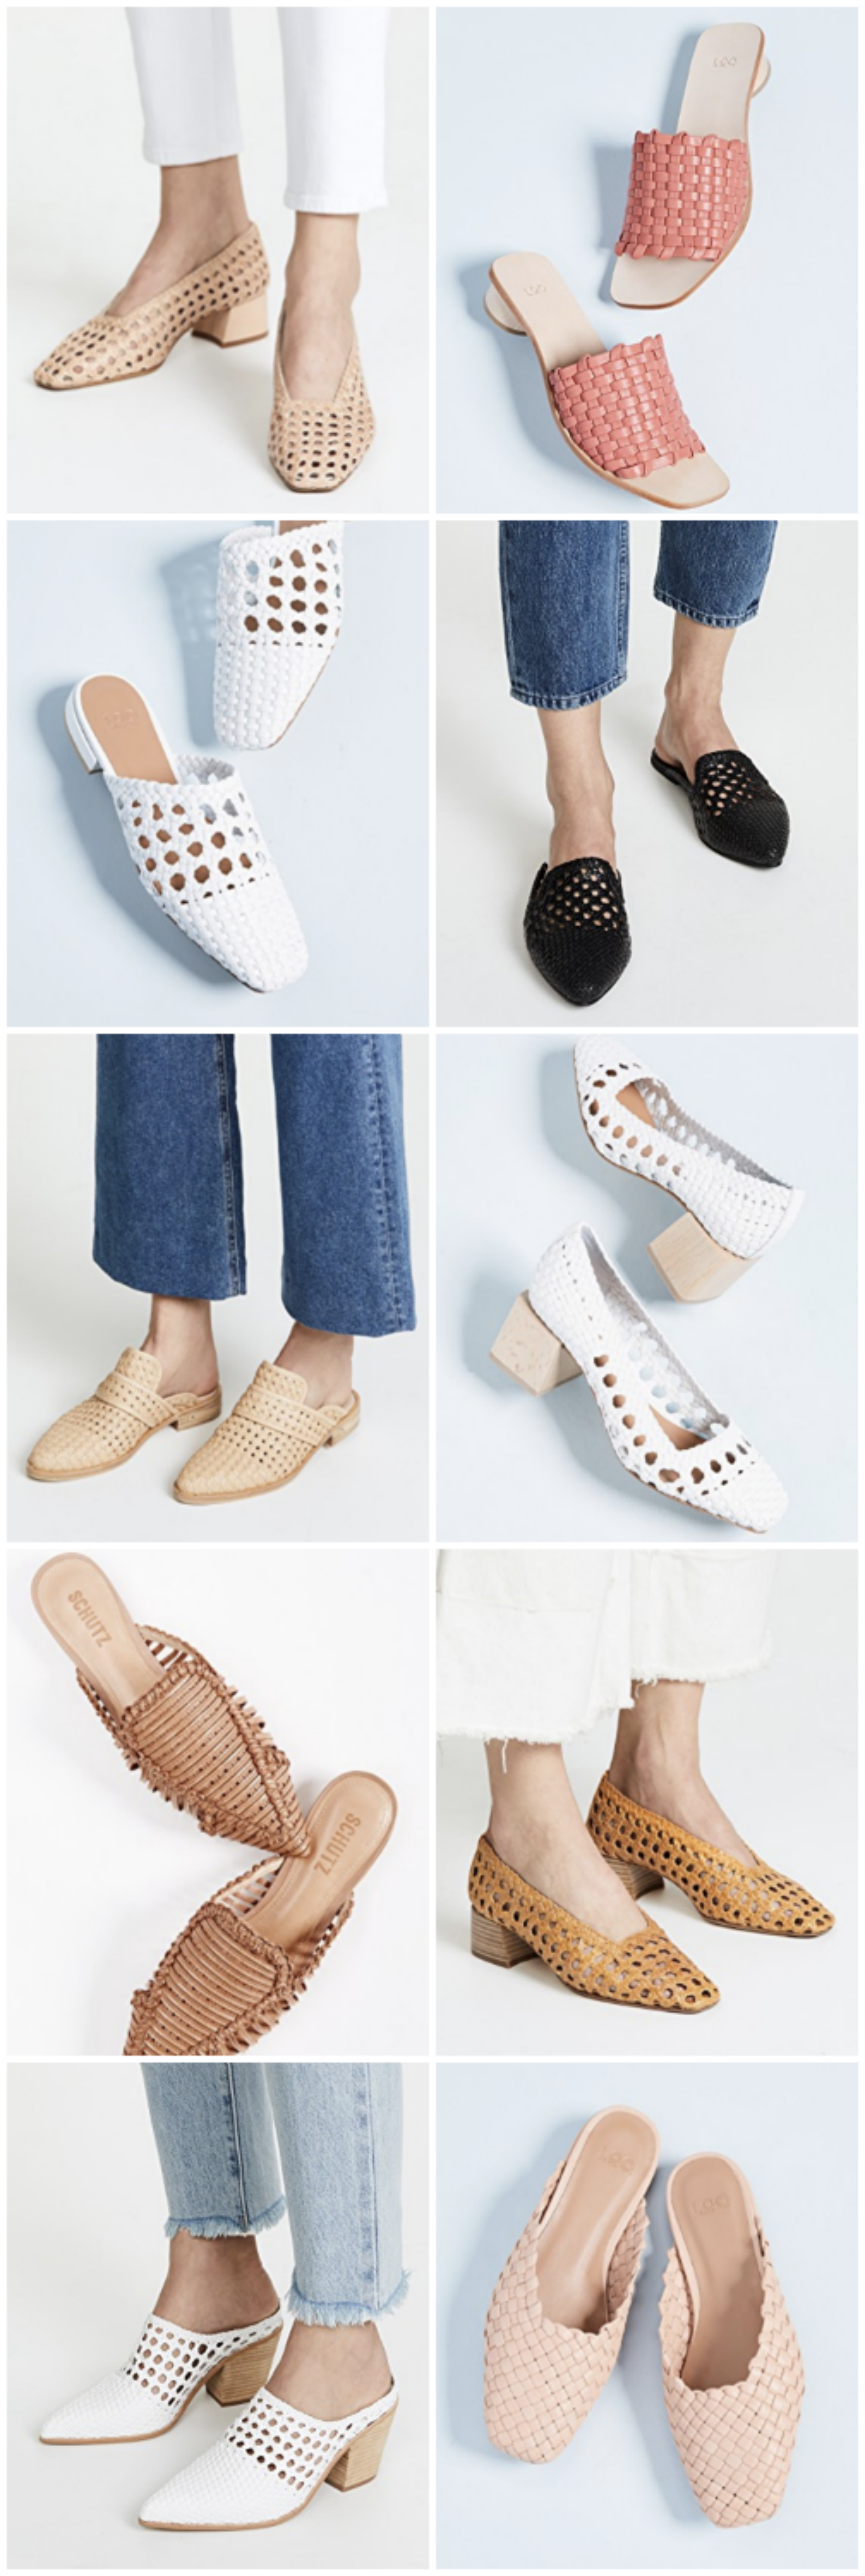 A SPRING MUST HAVE // WOVEN SHOES | Atlantic-Pacific